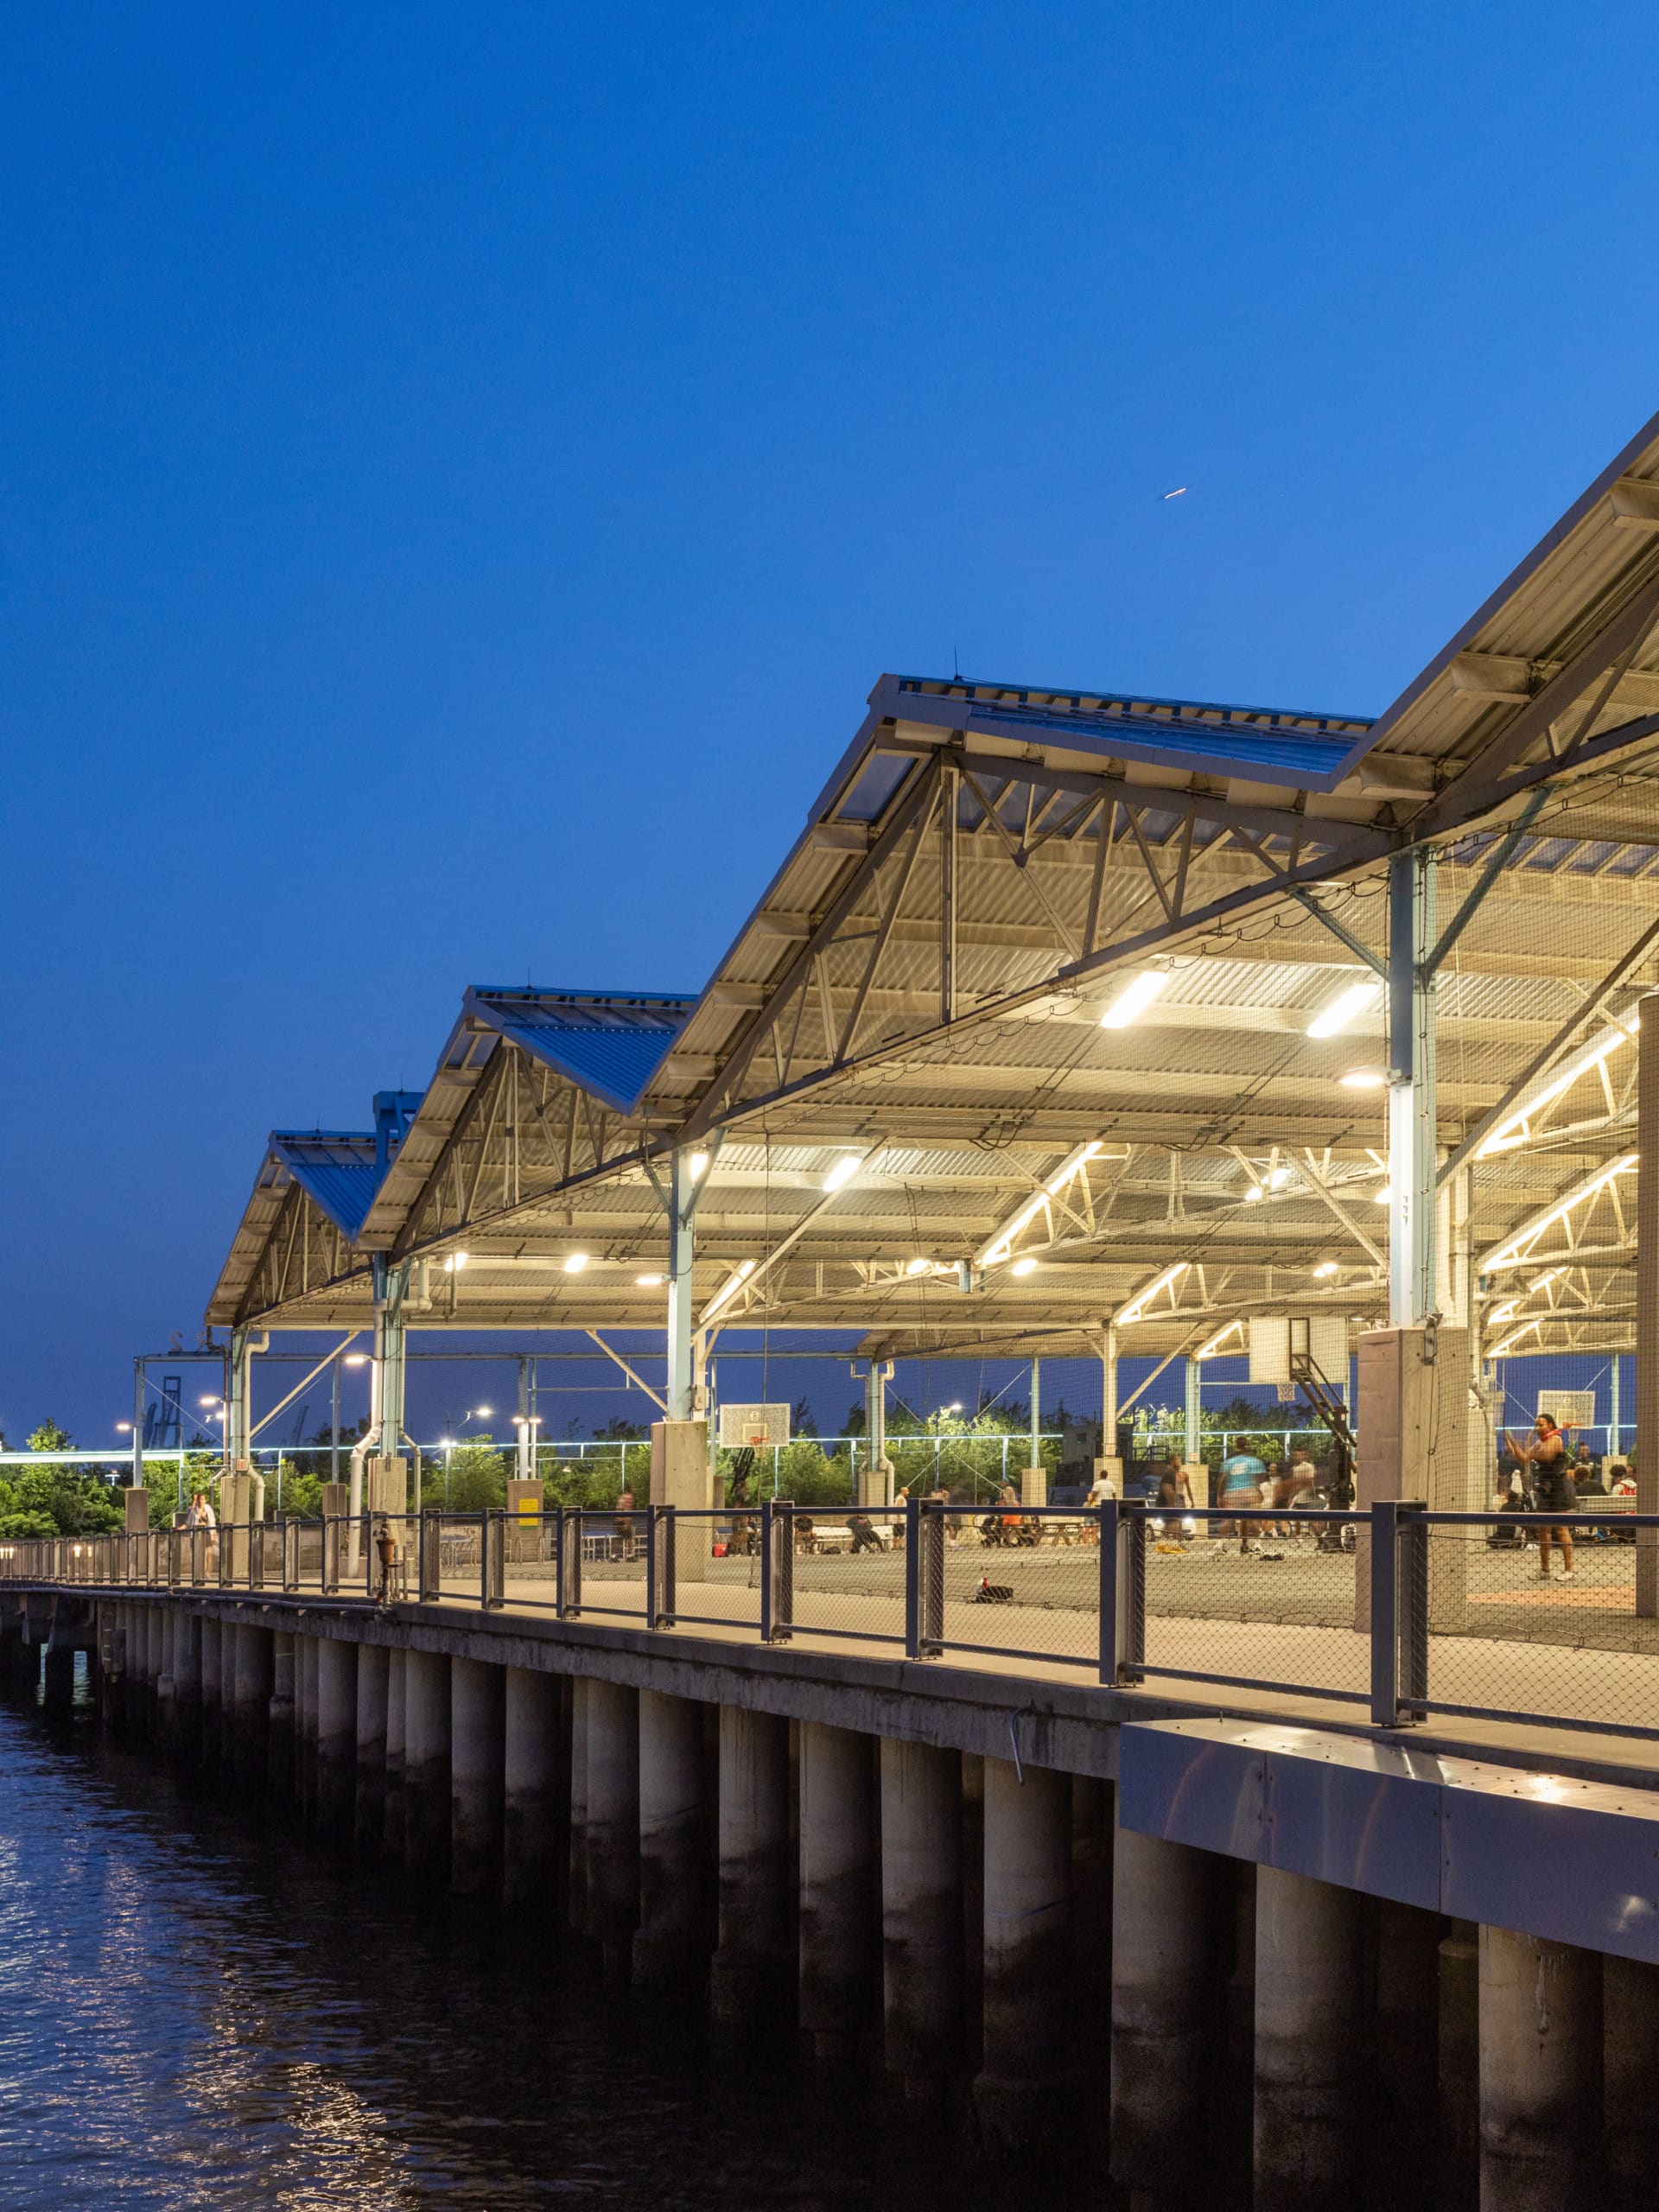 View along Pier 2 at night. Fitness area and basketball courts are seen under the roof.